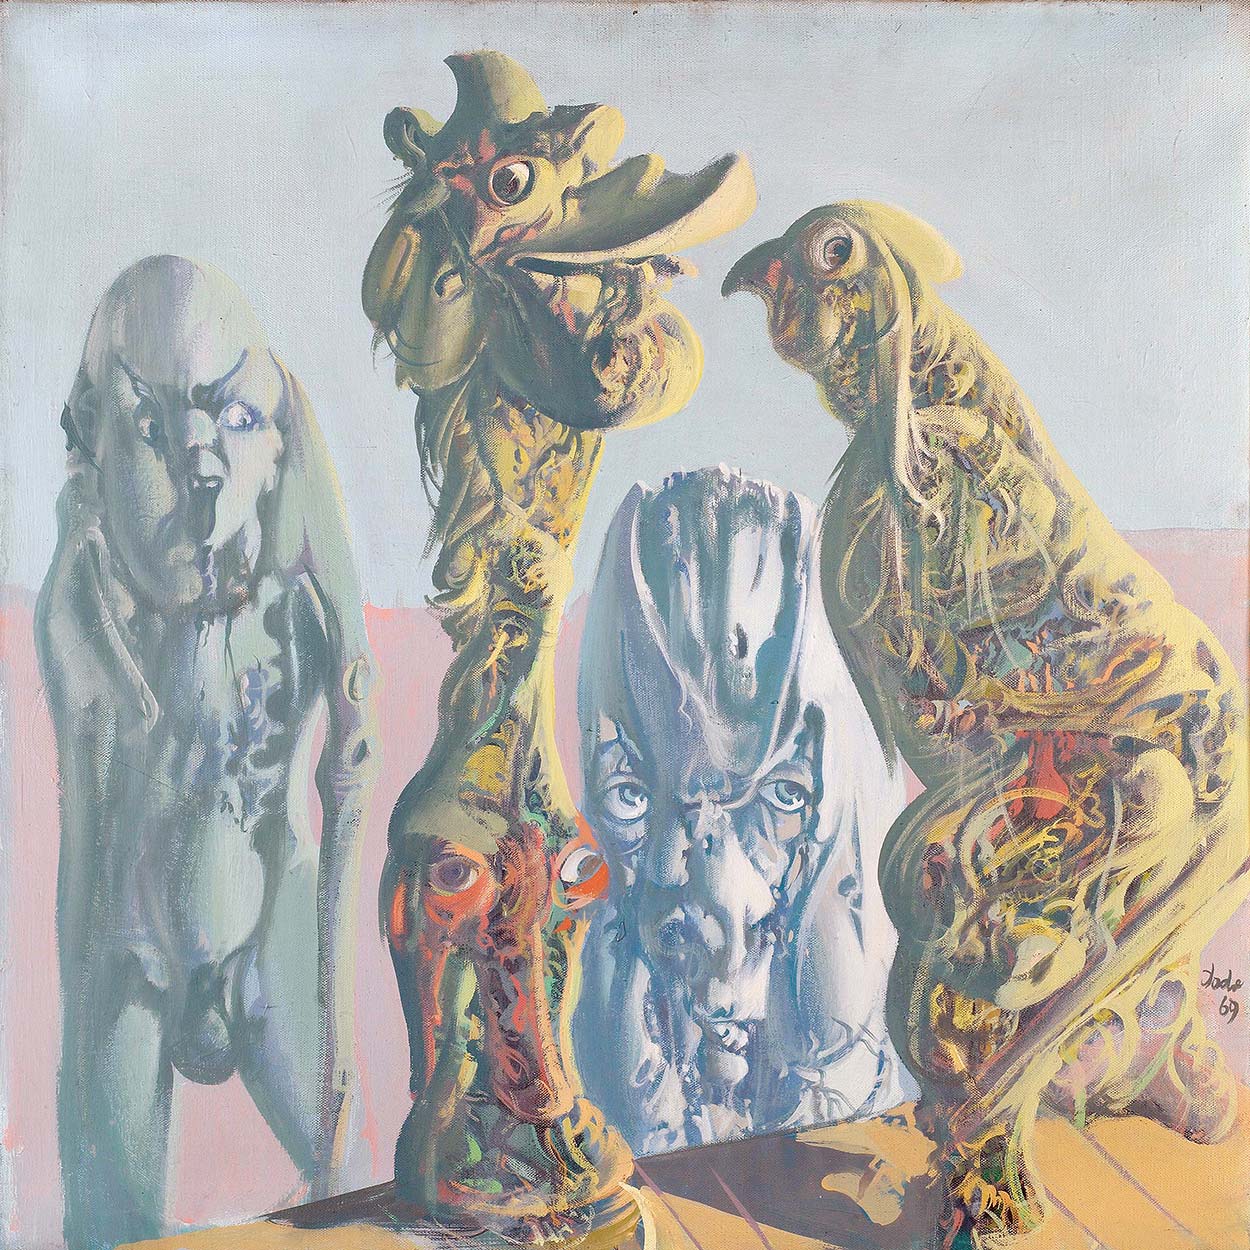 Dado’s painting: The Gallery of Ancestors, 1969